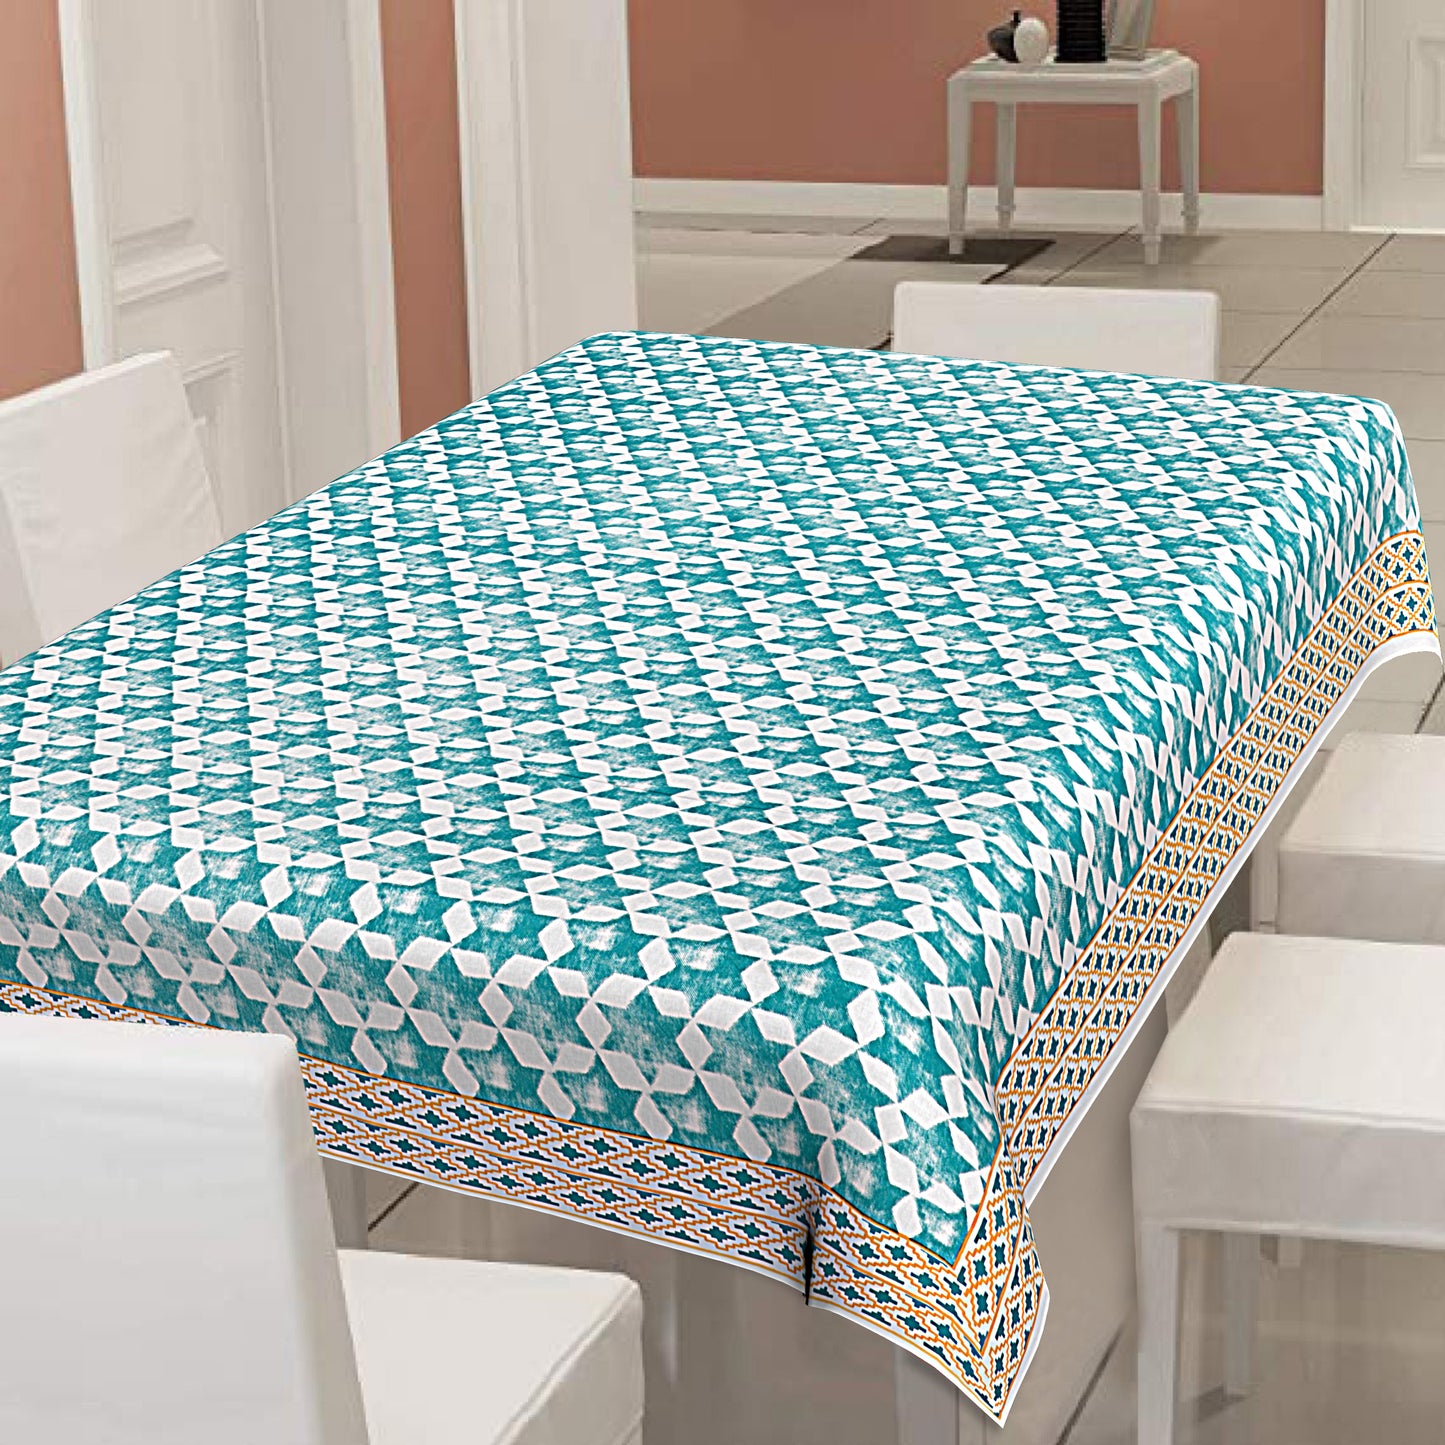 Sea Green Starry World 82 x 60 inches Dining Table Cover